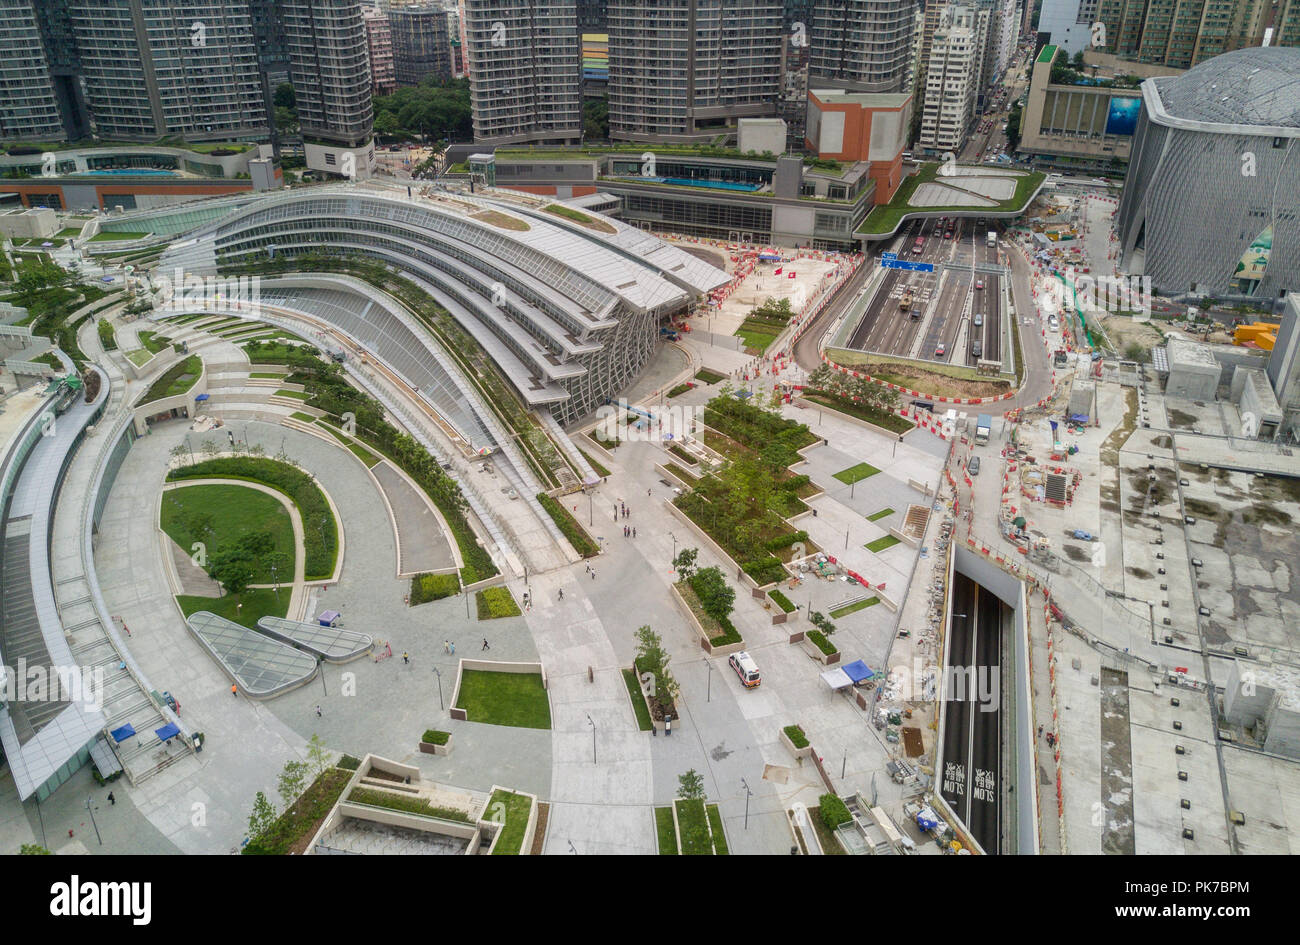 Aerial view of the Kowloon West Railway Terminus. The High Speed Rail link will start service on September 23, 2018 and connect Hong Kong West Kowloon Station to 44 stations in Mainland linking it to China's 25,000km national high speed rail network. Stock Photo